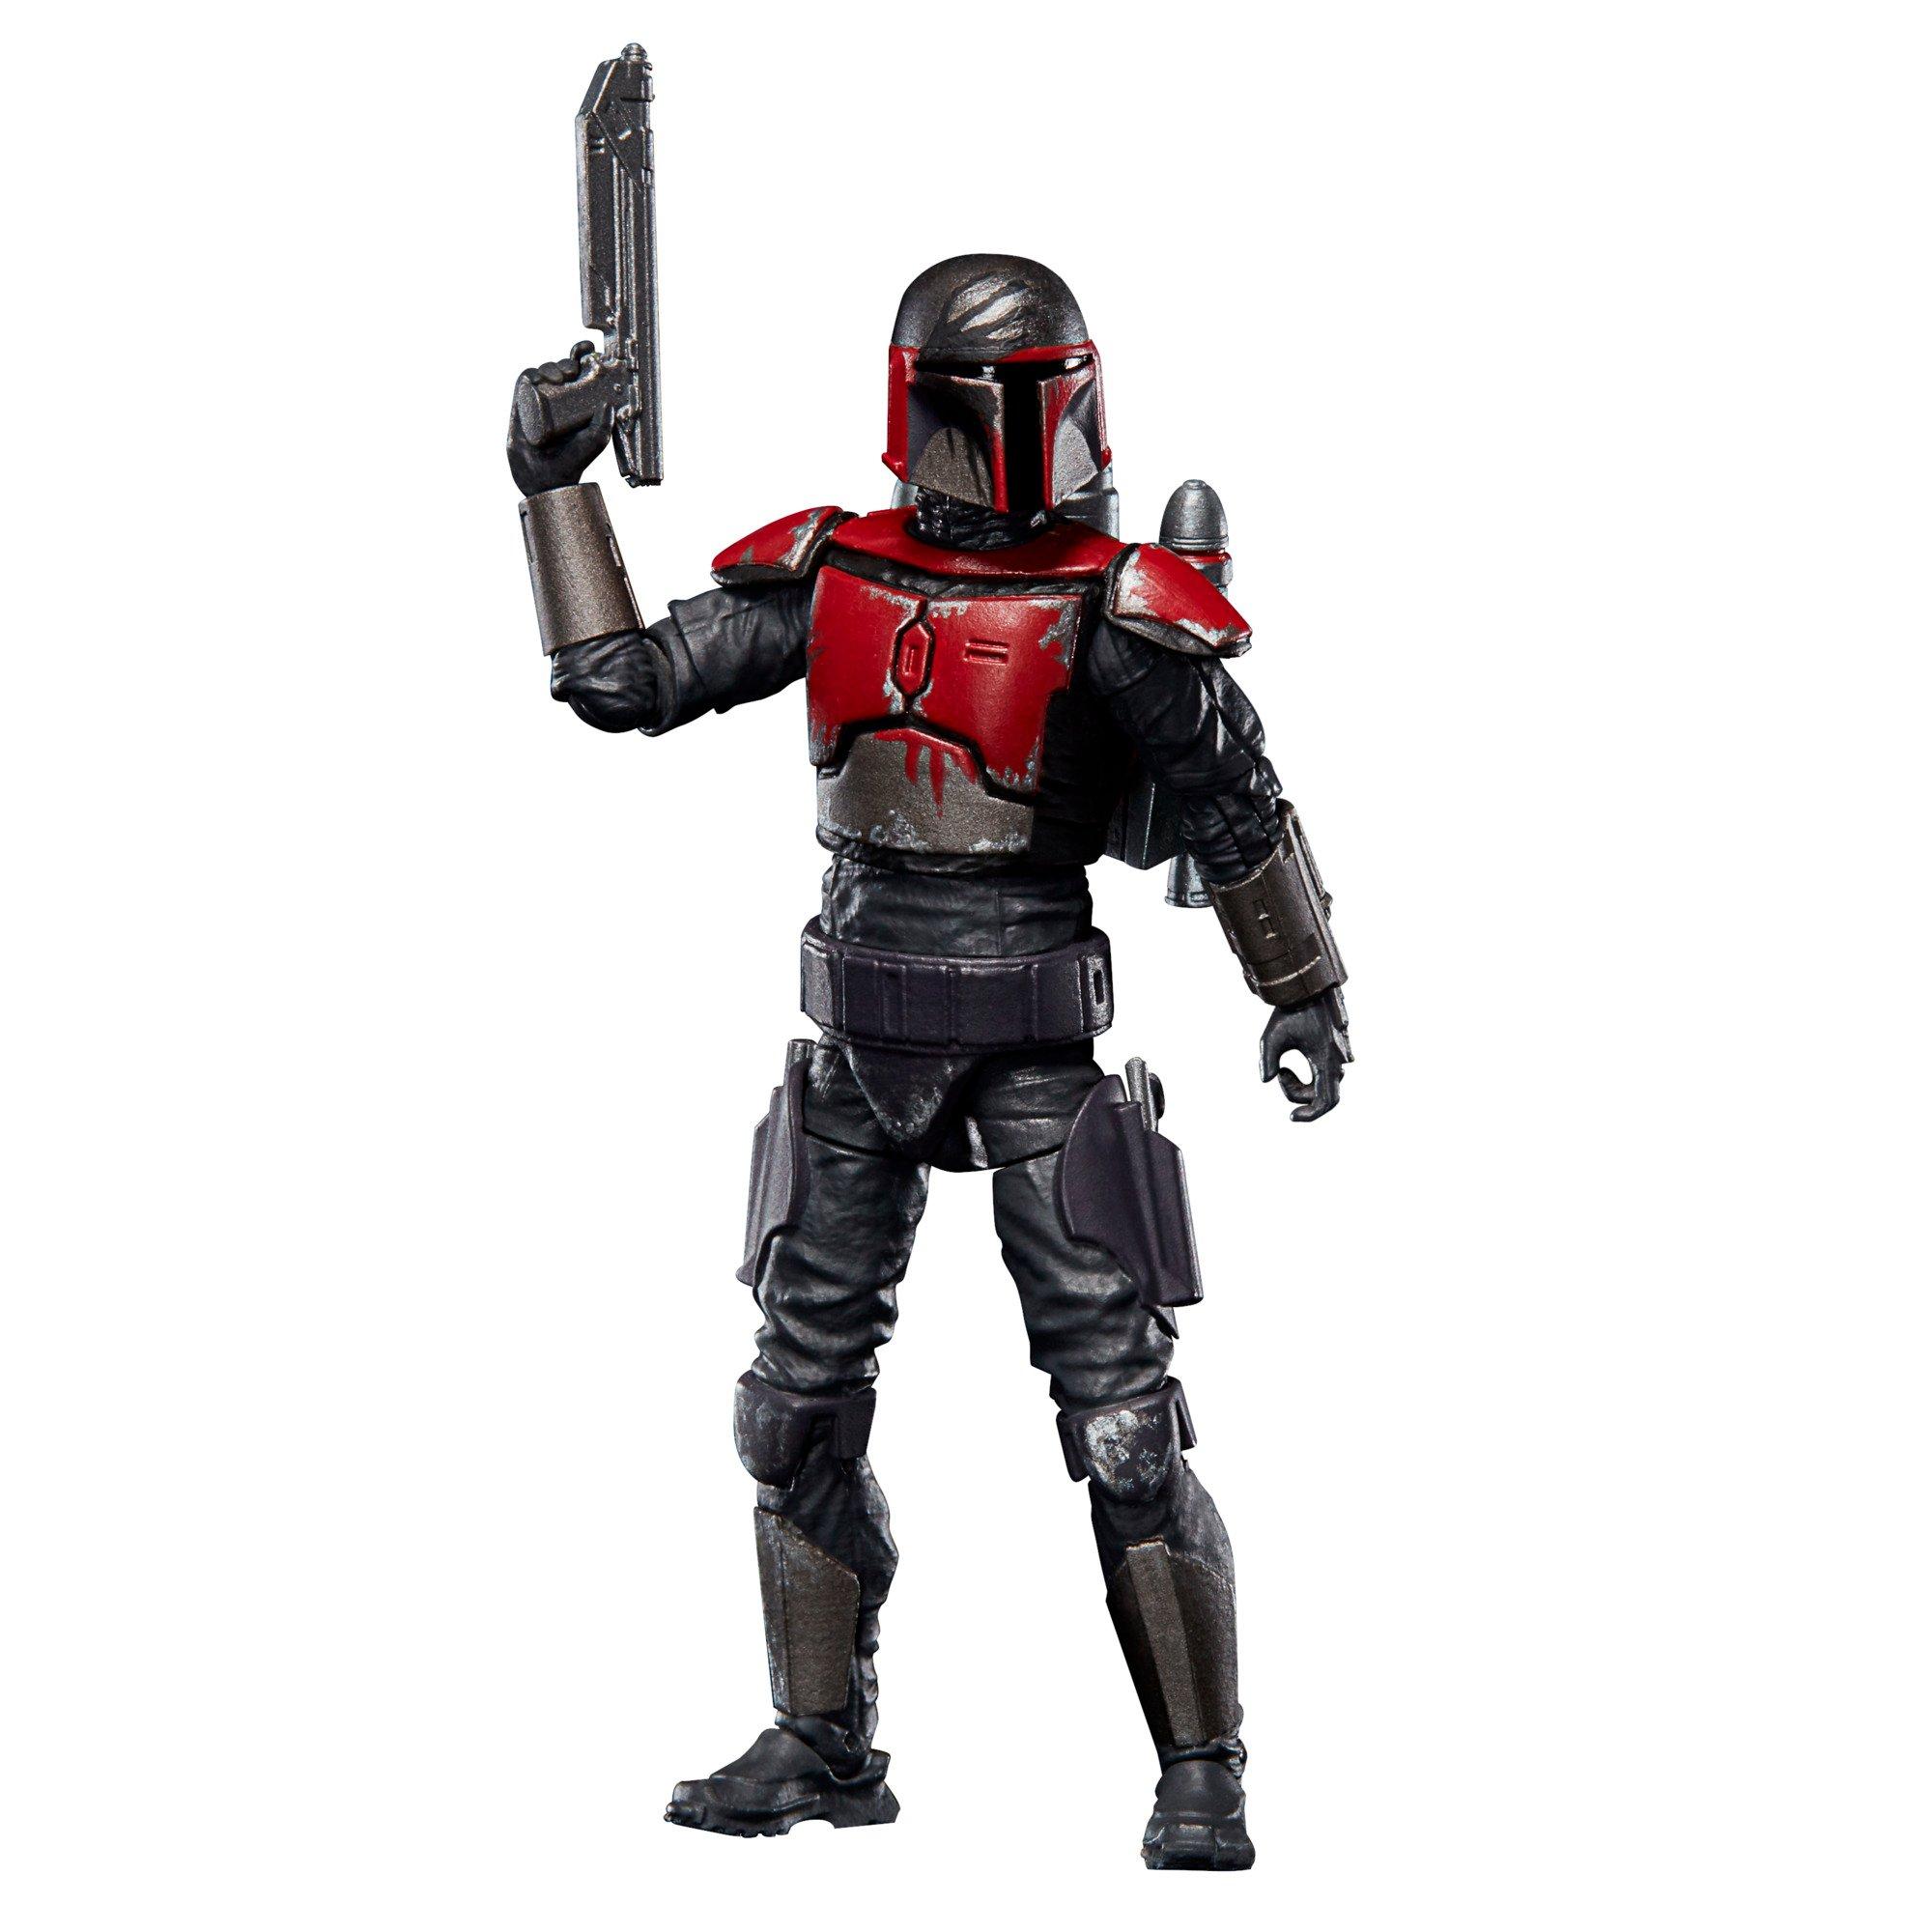 Hasbro Star Wars Armor NO.4 For 3.75" Action Figure 